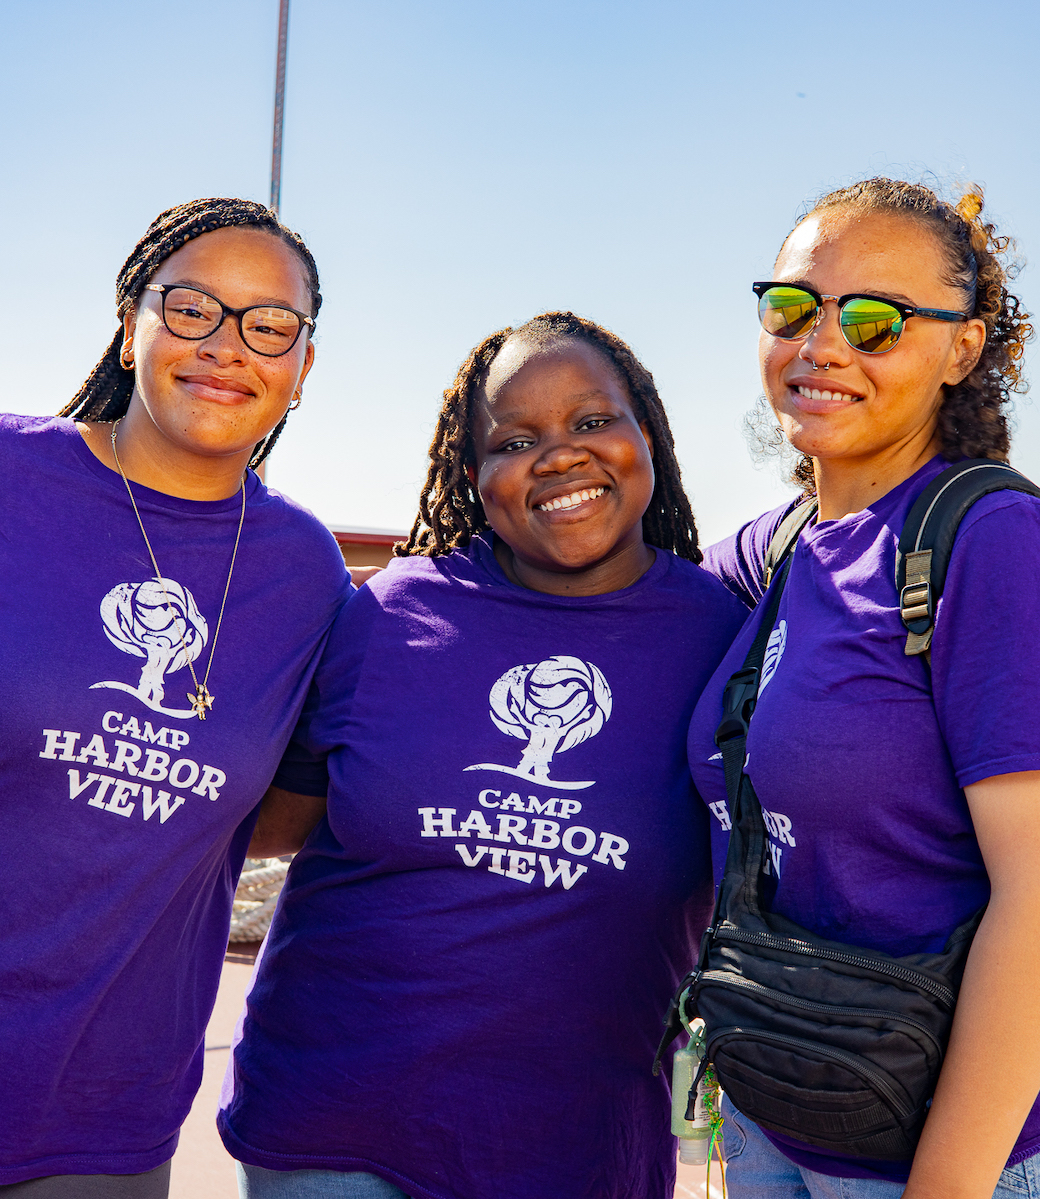 Three teenagers in purple Camp Harbor View shirts smiling at the camera on a sunny day.